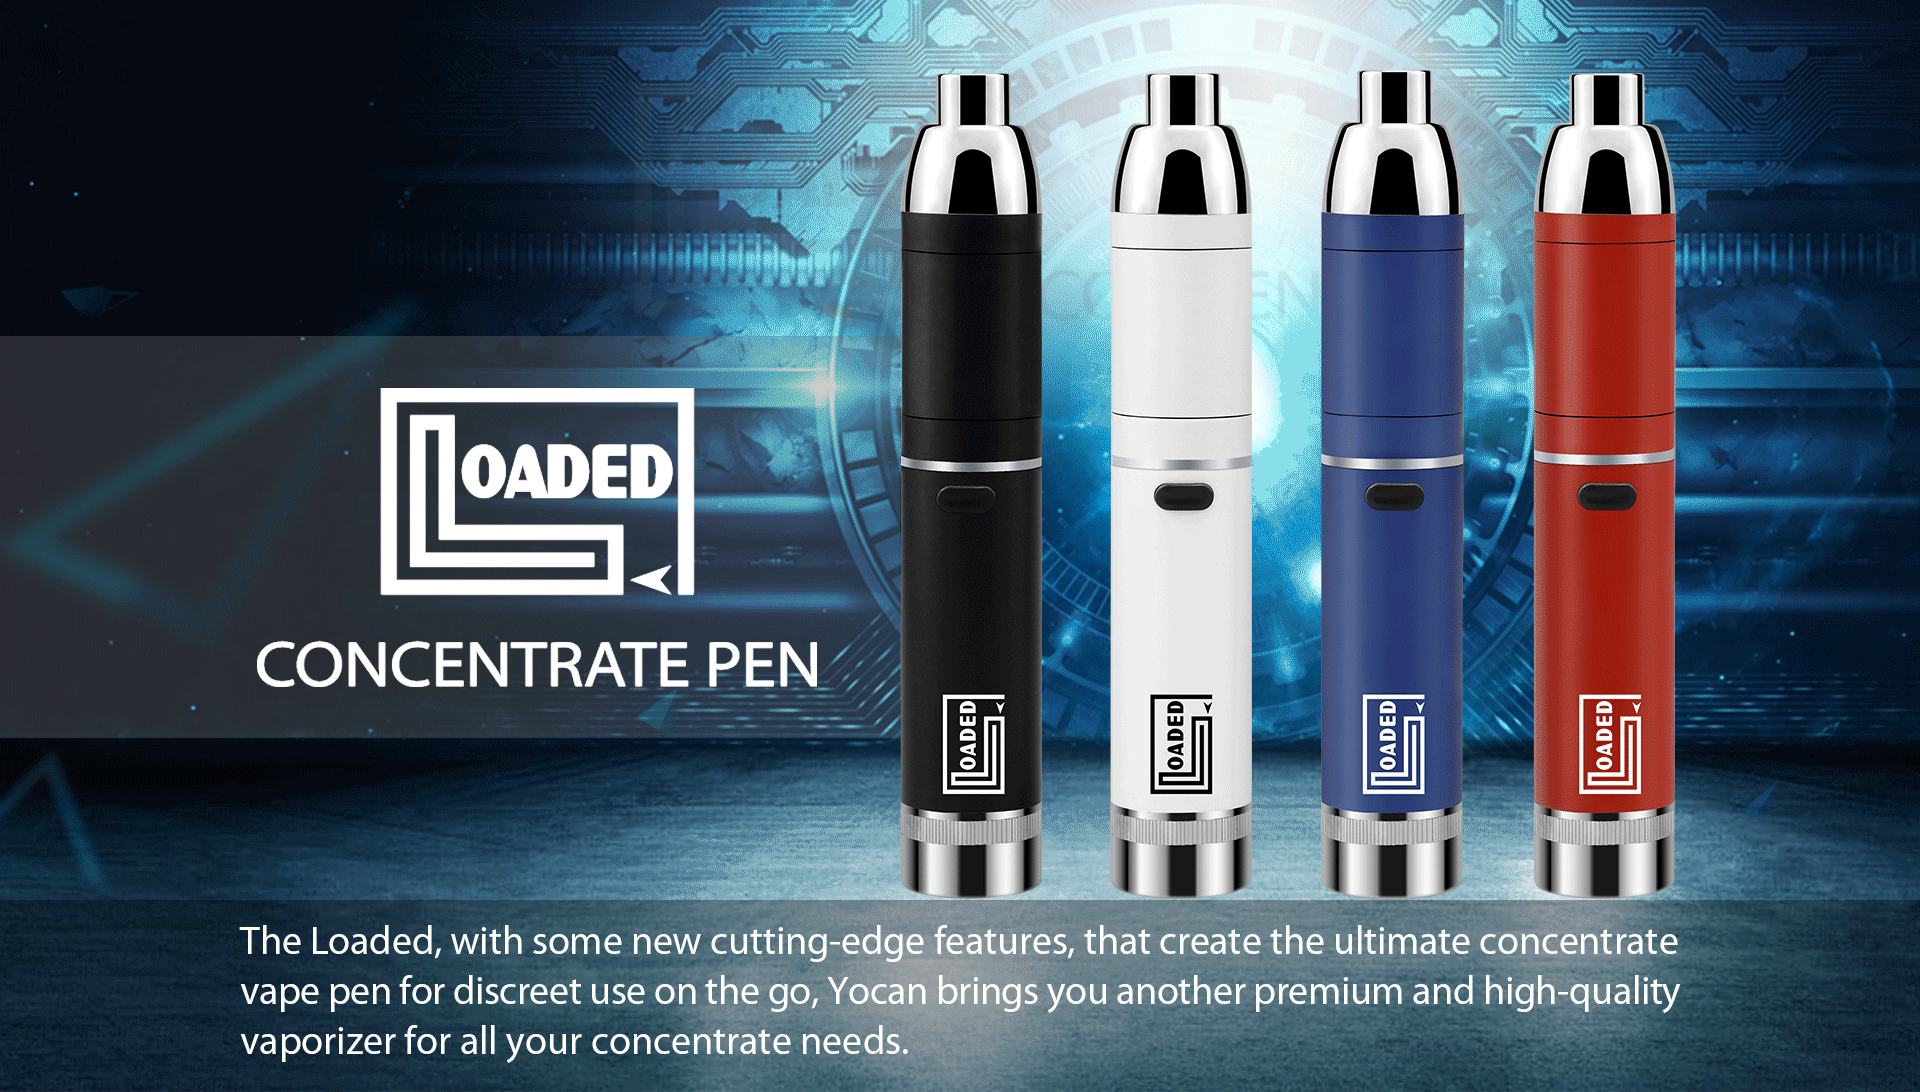 Yocan Loaded features some new cutting-edge functions that create the ultimate concentrate vape pen for discreet use on the go.